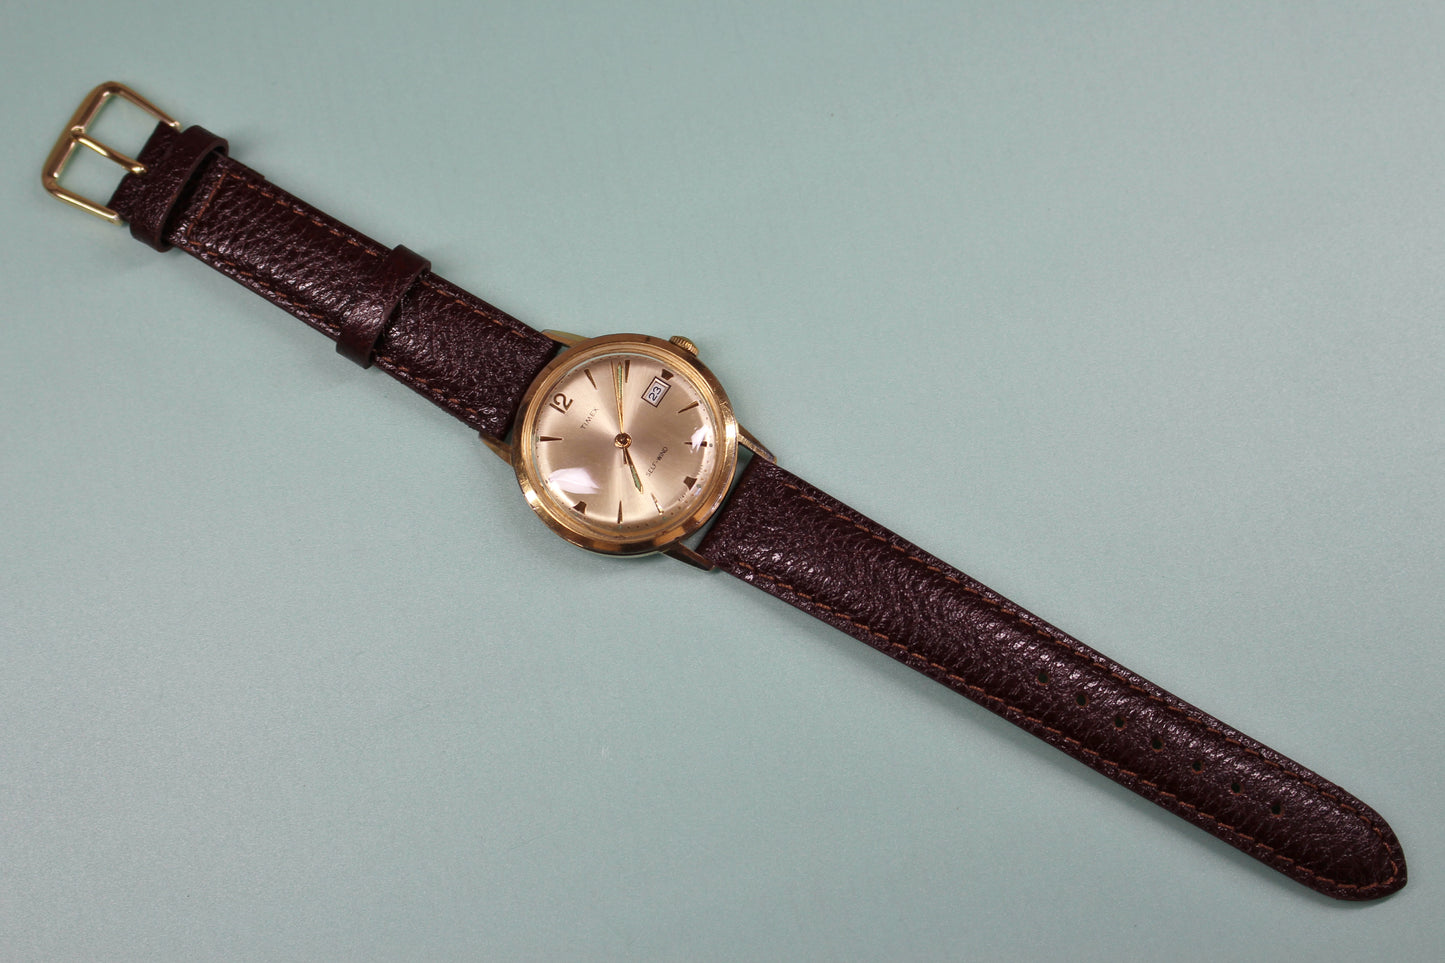 Vintage Timex Gold-Tone Automatic